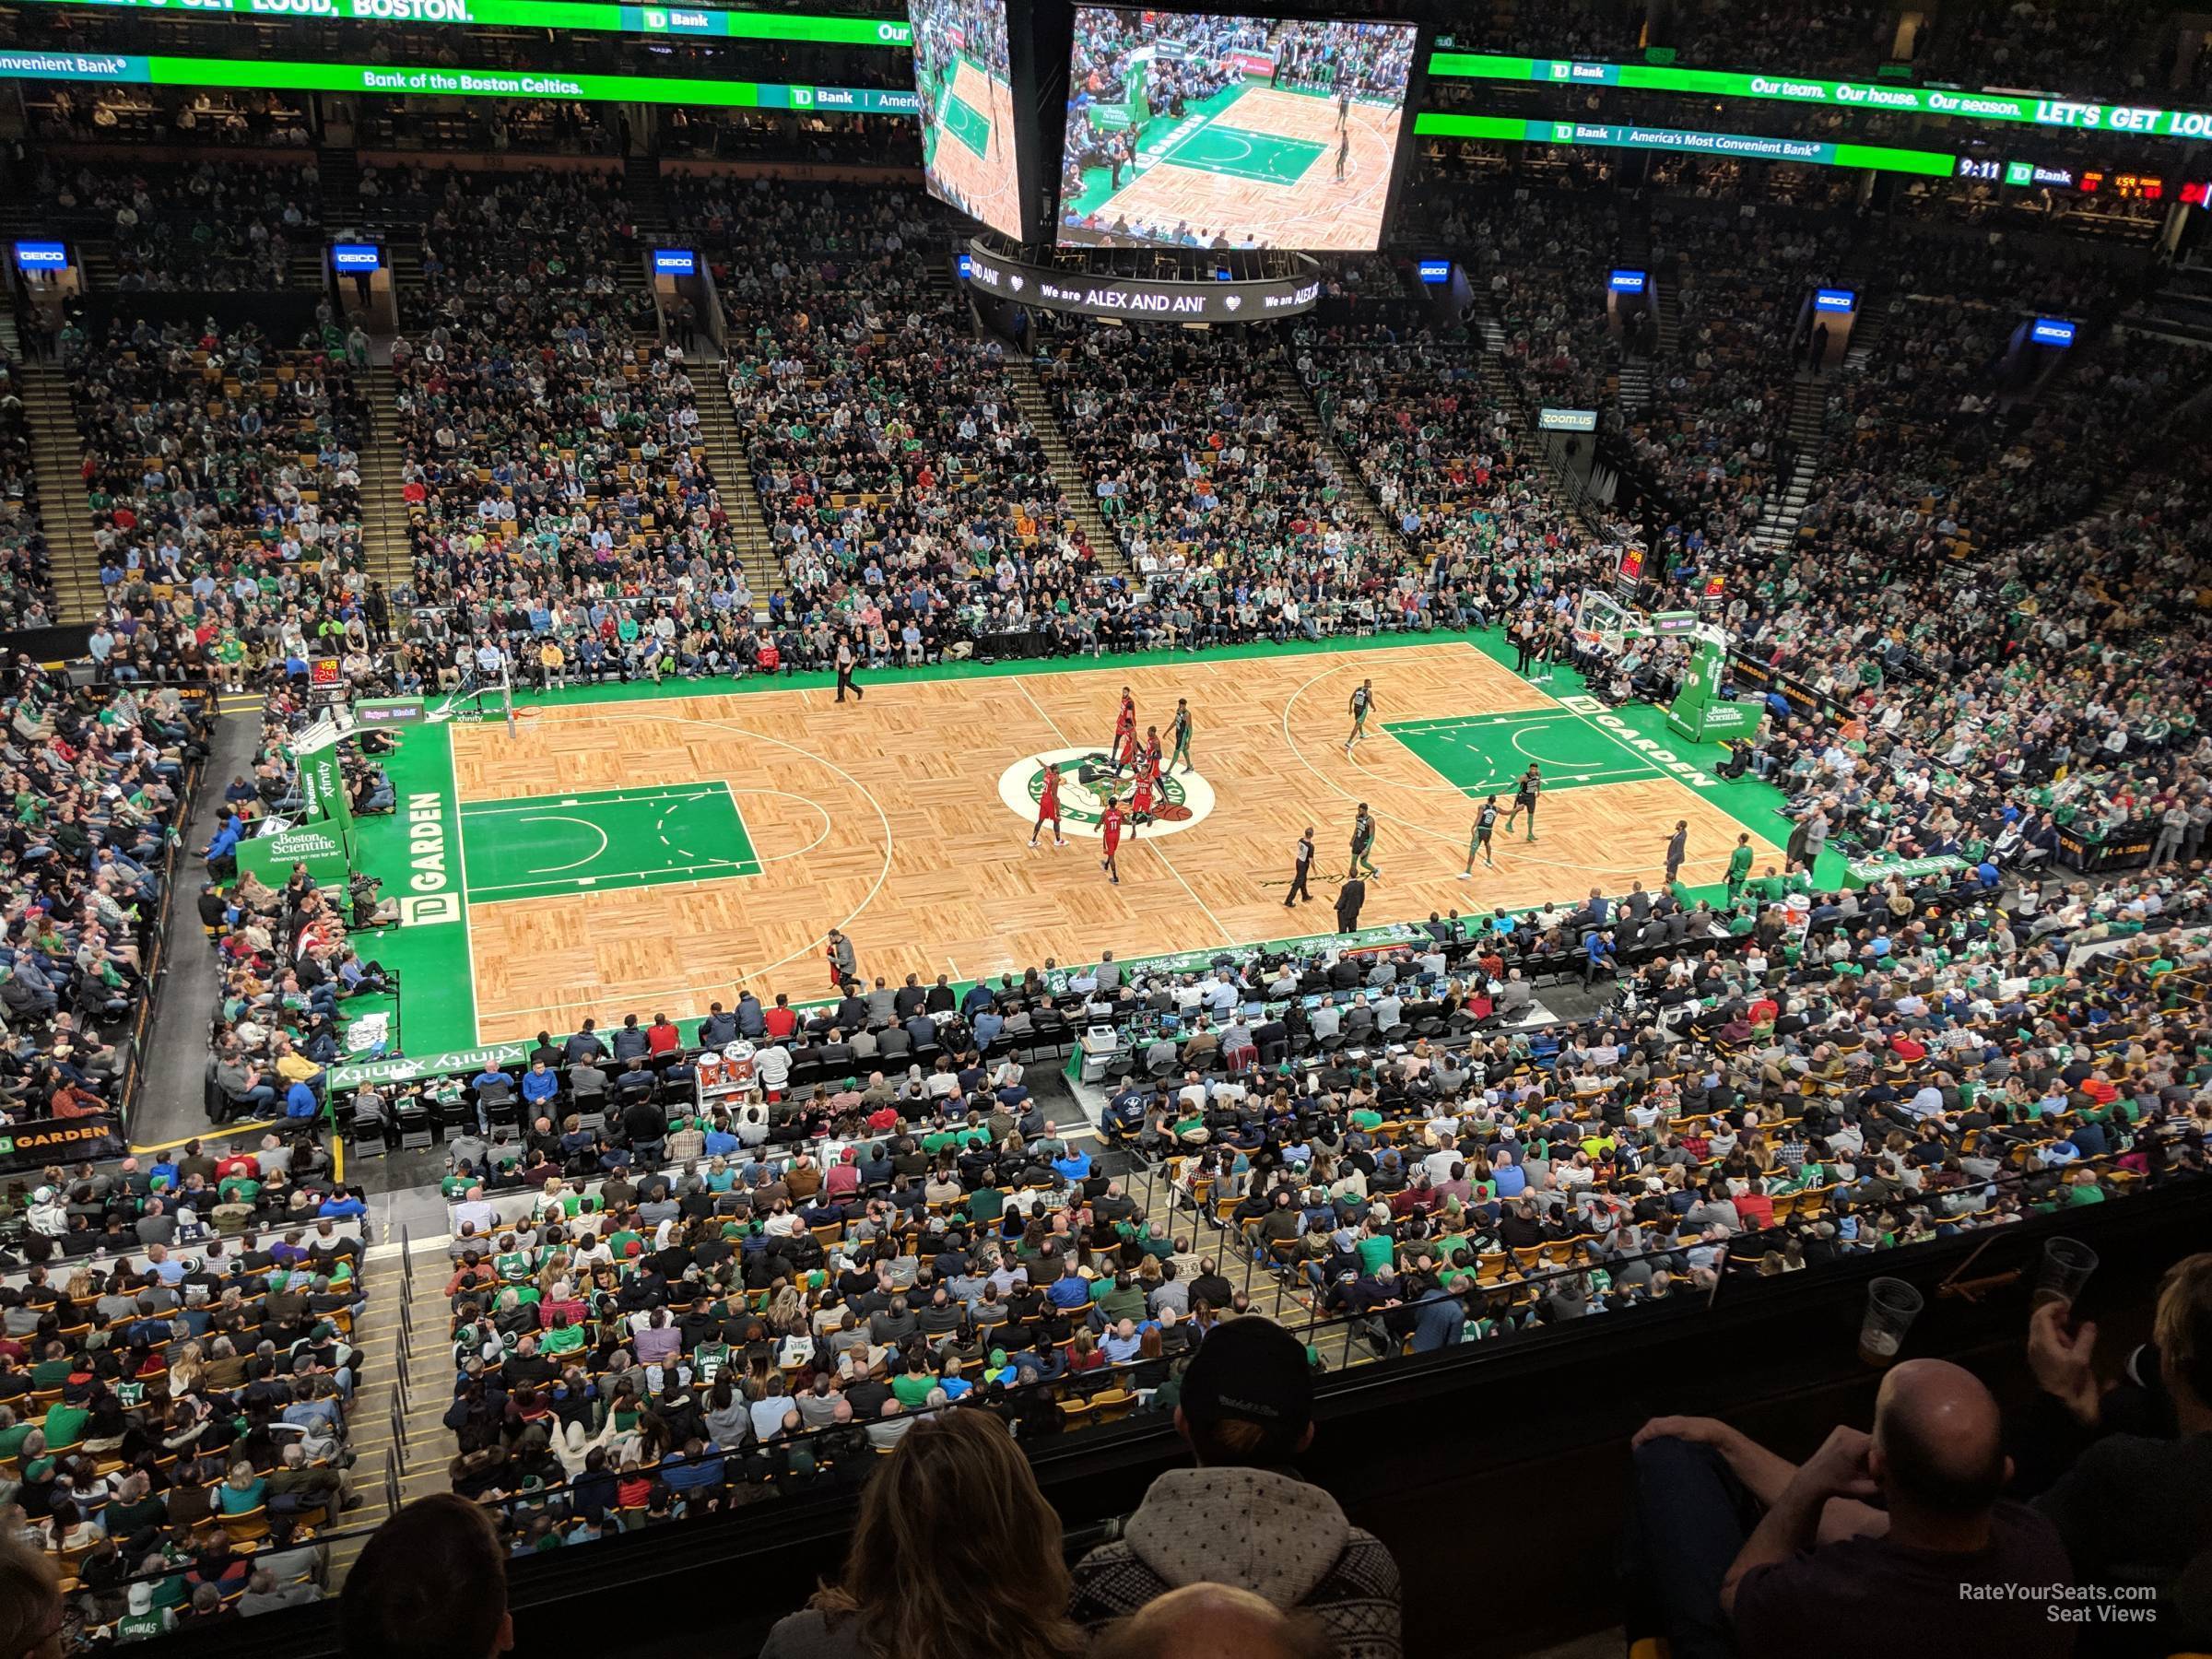 section 302, row 3 seat view  for basketball - td garden